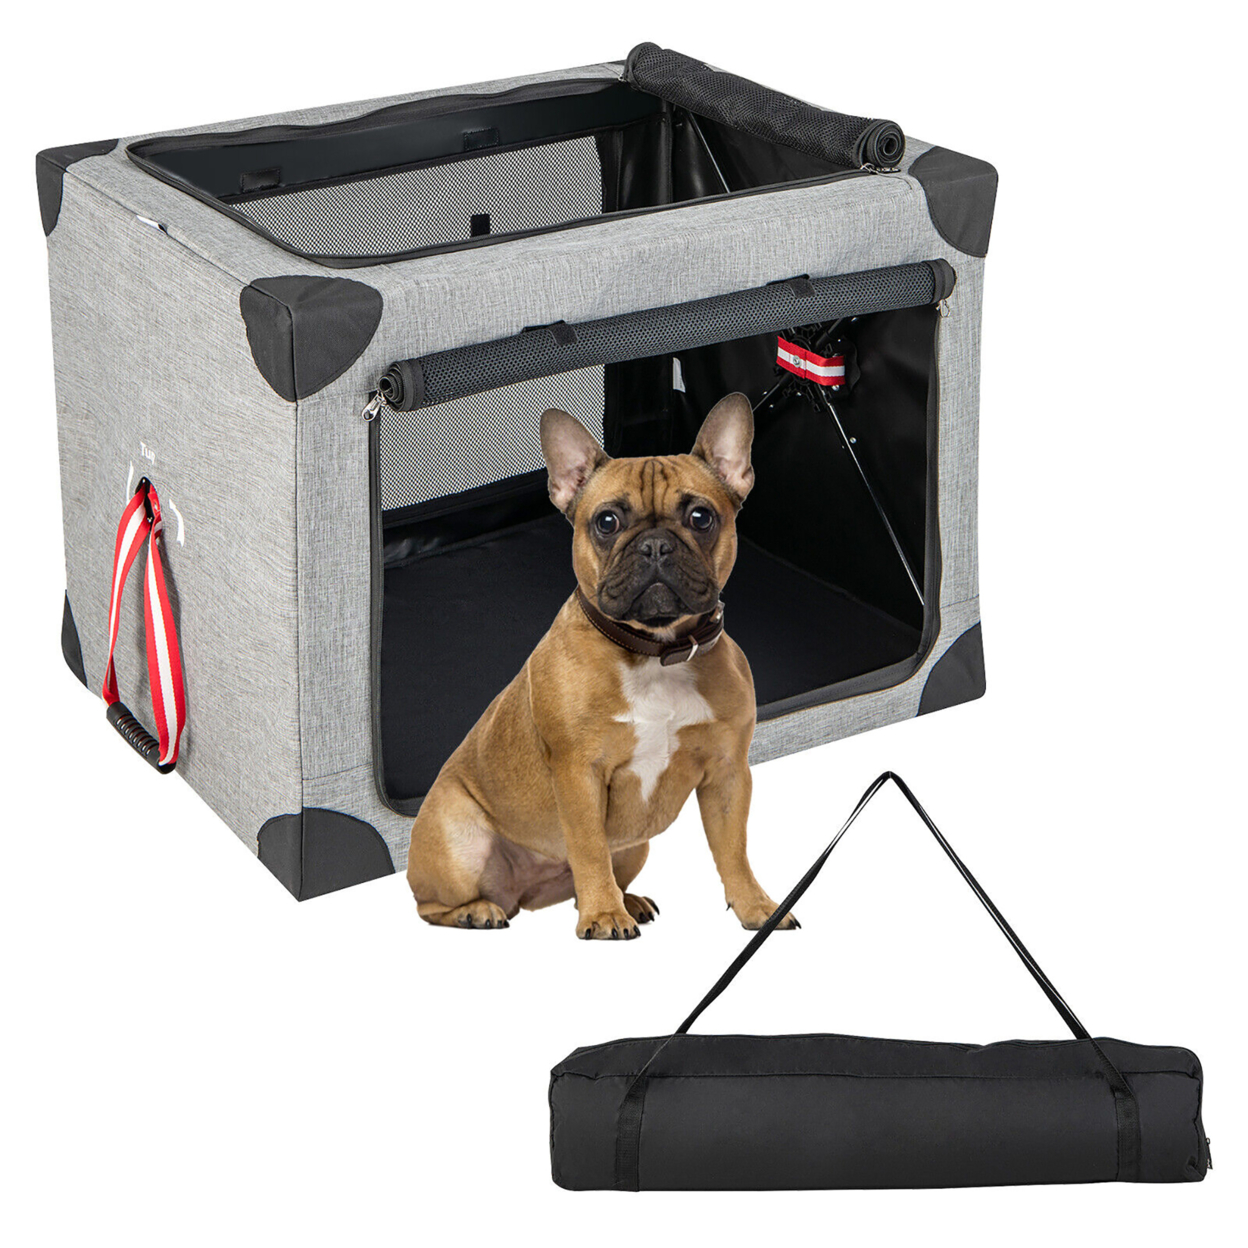 26/32/37 In Portable Folding Dog Crate W/ Mesh Mat & Locking Zippers For Cat Carrier Use - M